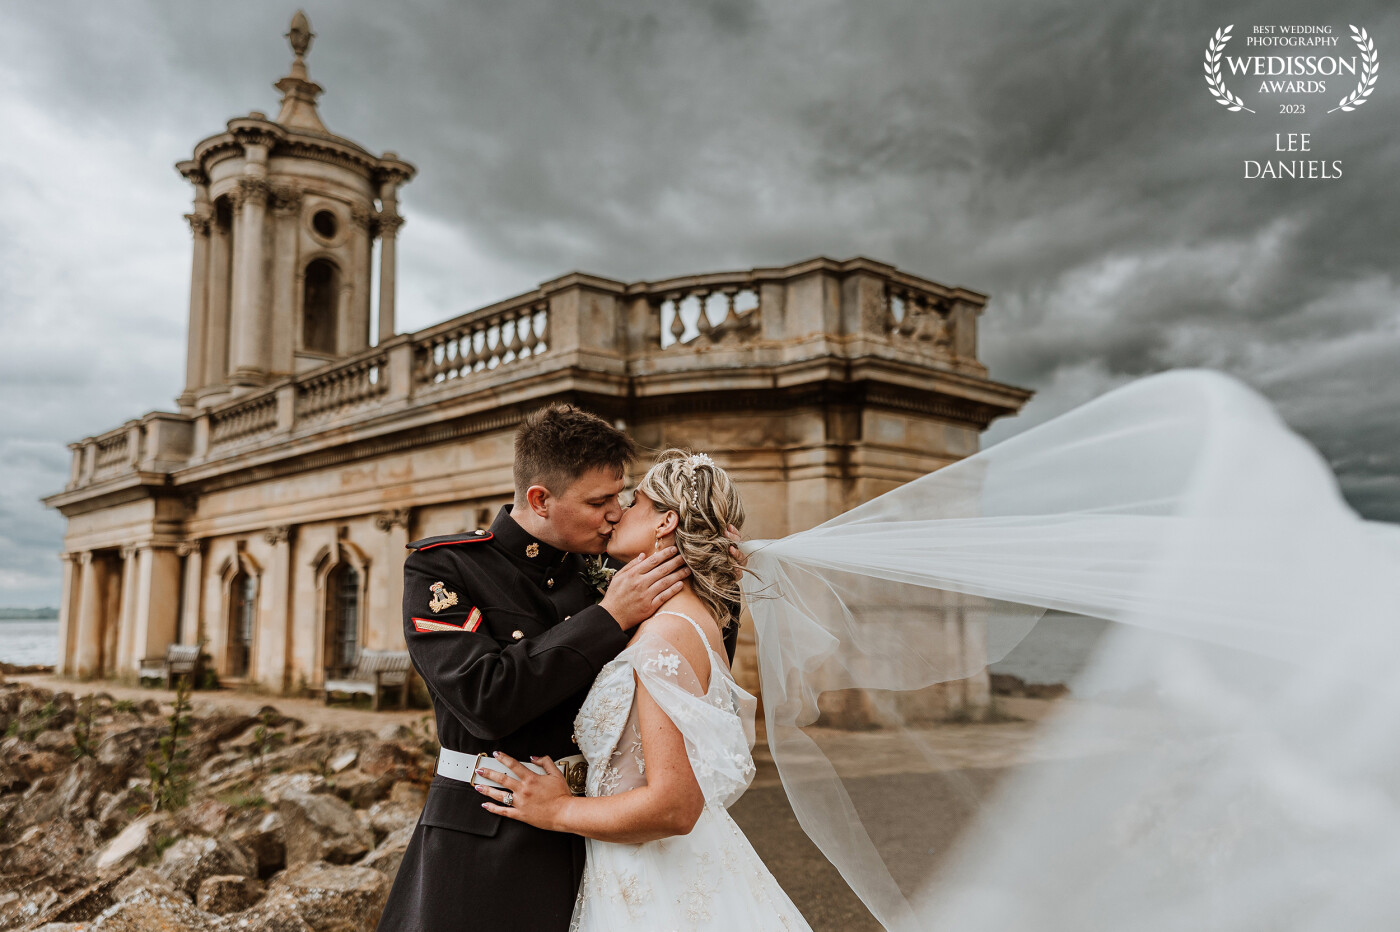 Samantha & Lucas during their dream wedding at Normanton Church in Rutland, what's not to love about a moody sky and a veil flowing in the breeze